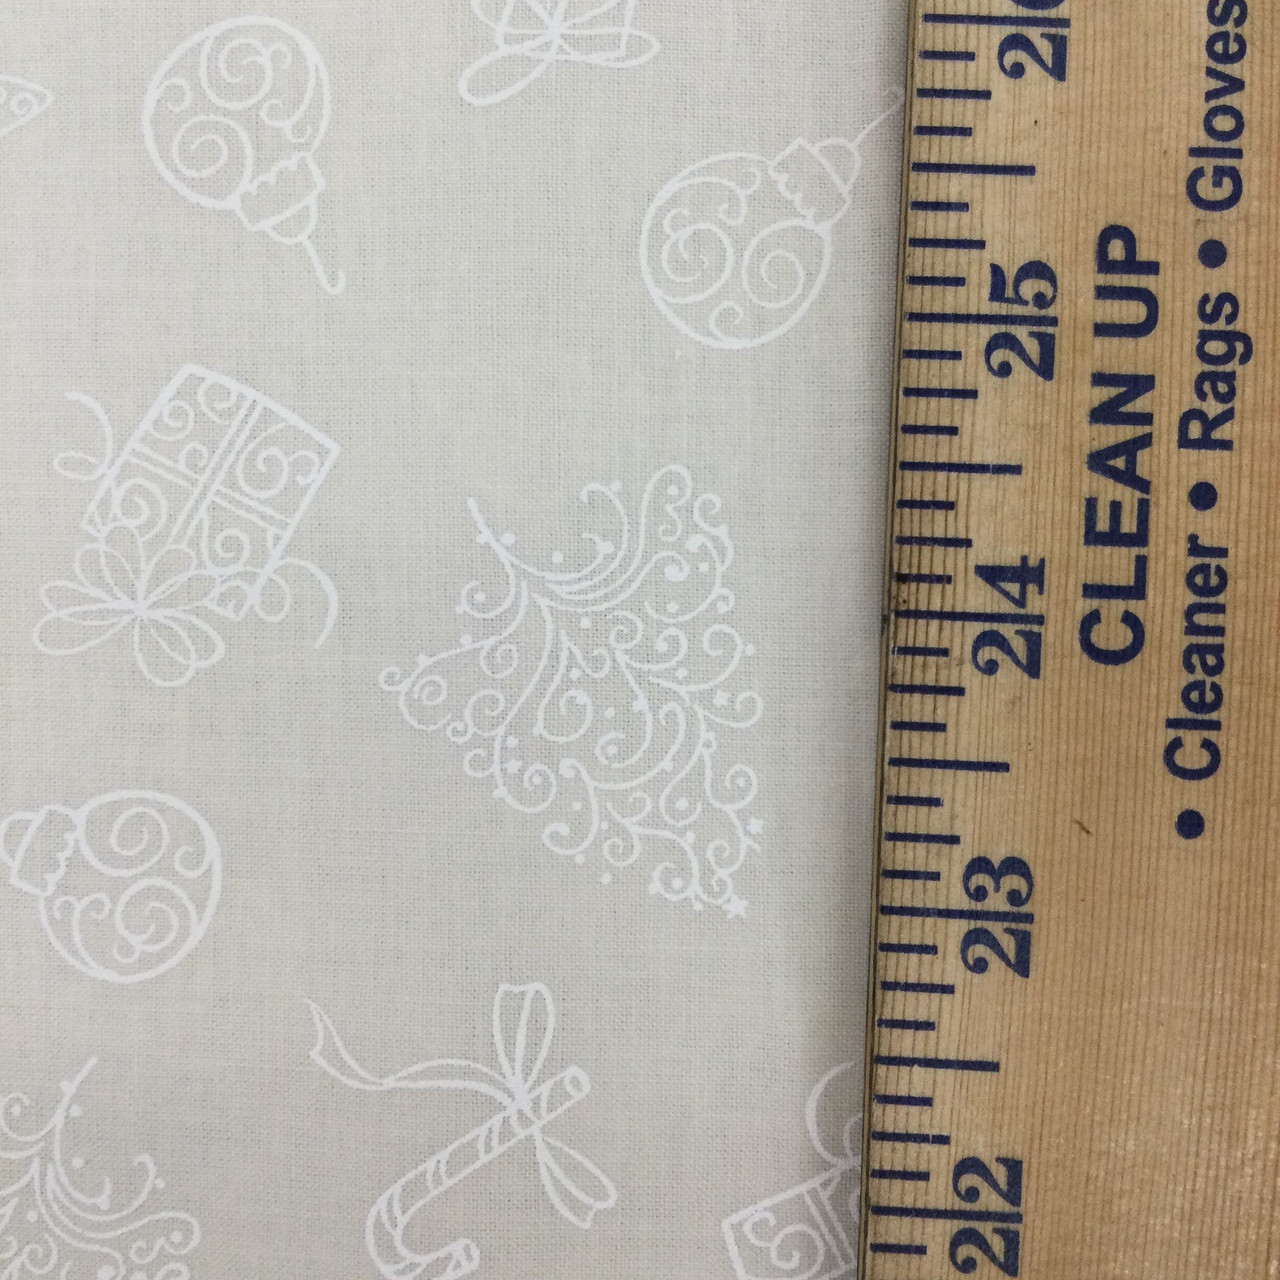 Natural 100% Cotton 60 wide Unbleched Muslin Fabric by the yard 